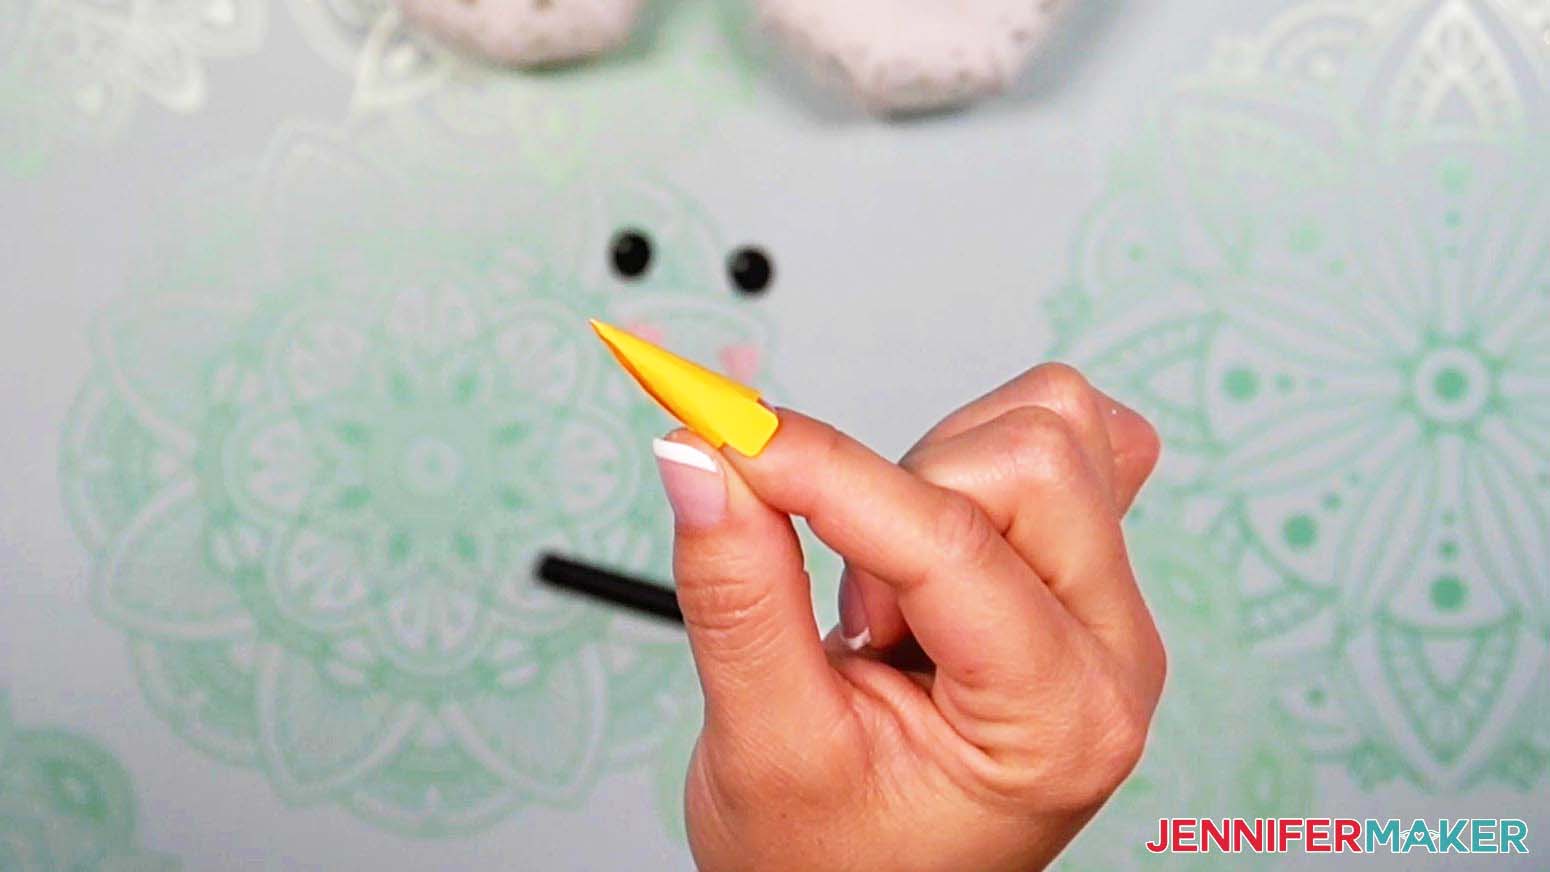 Roll the light up snowman's nose piece into a cone shape with your fingers, so the two tabs are opposite each other